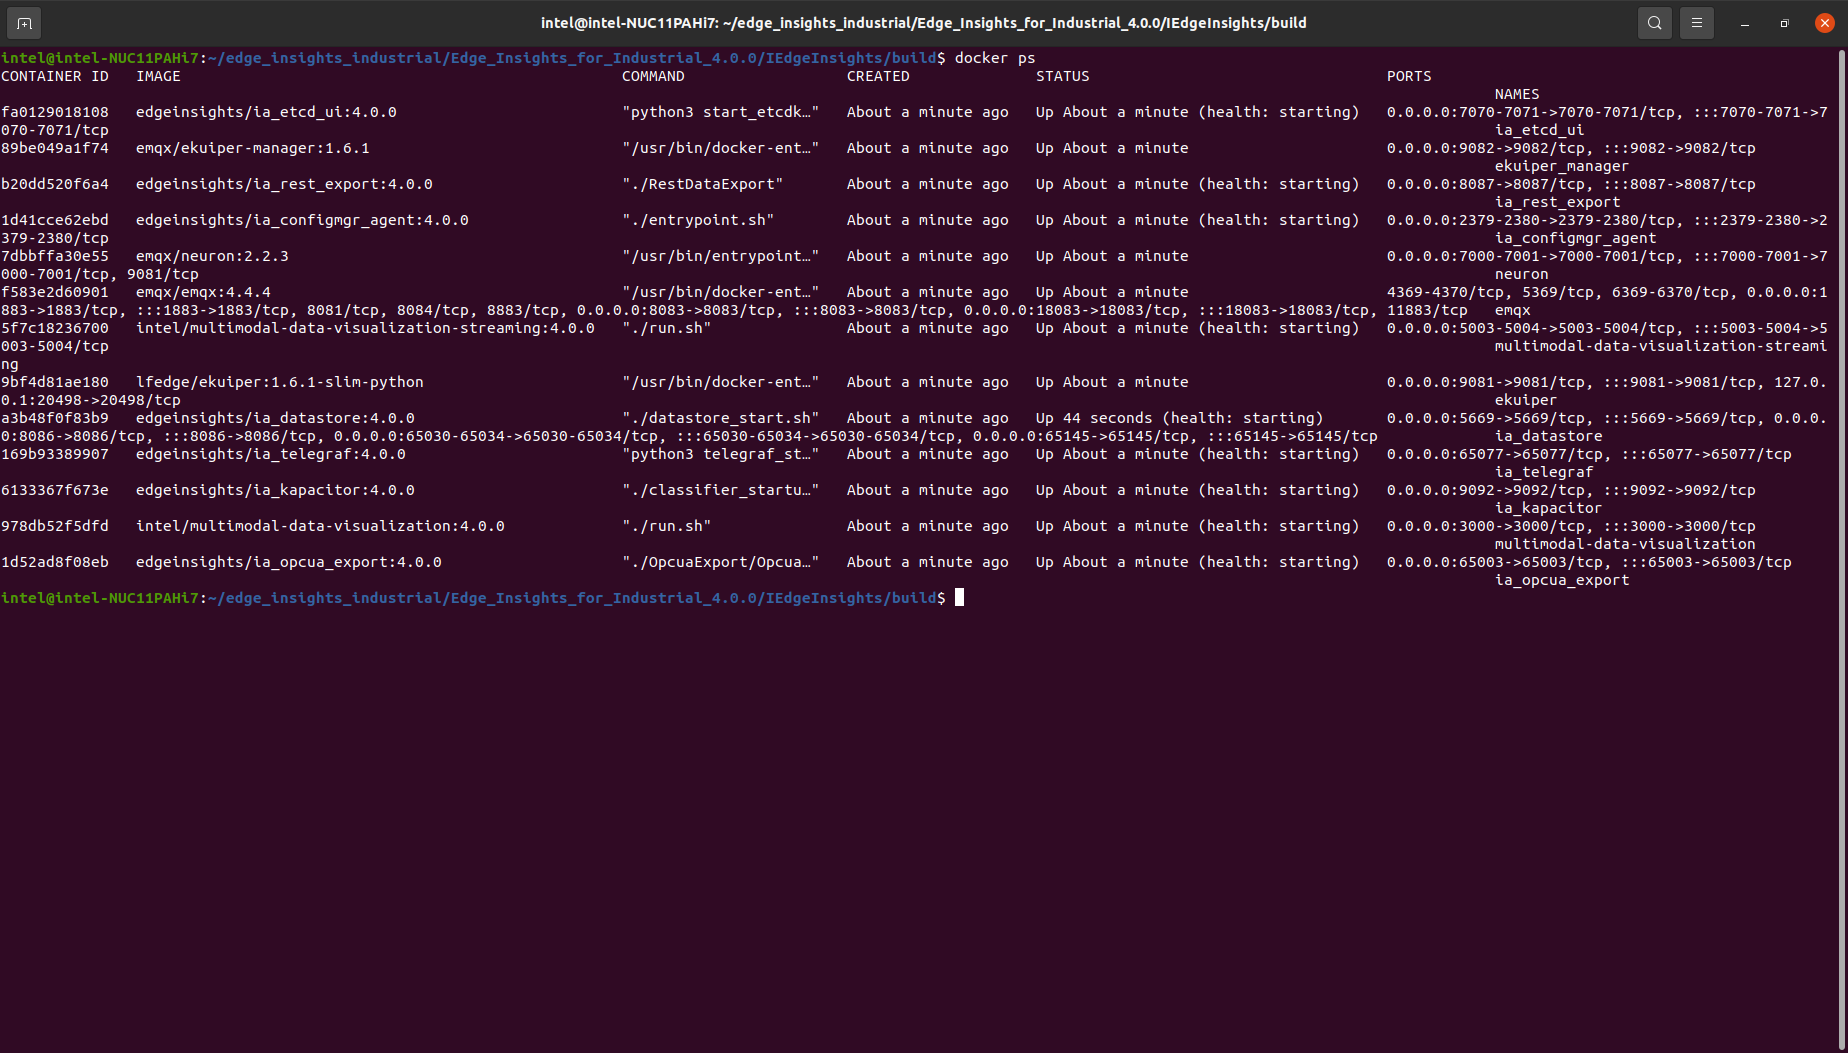 A terminal showing docker ps command and then the services and their status. 